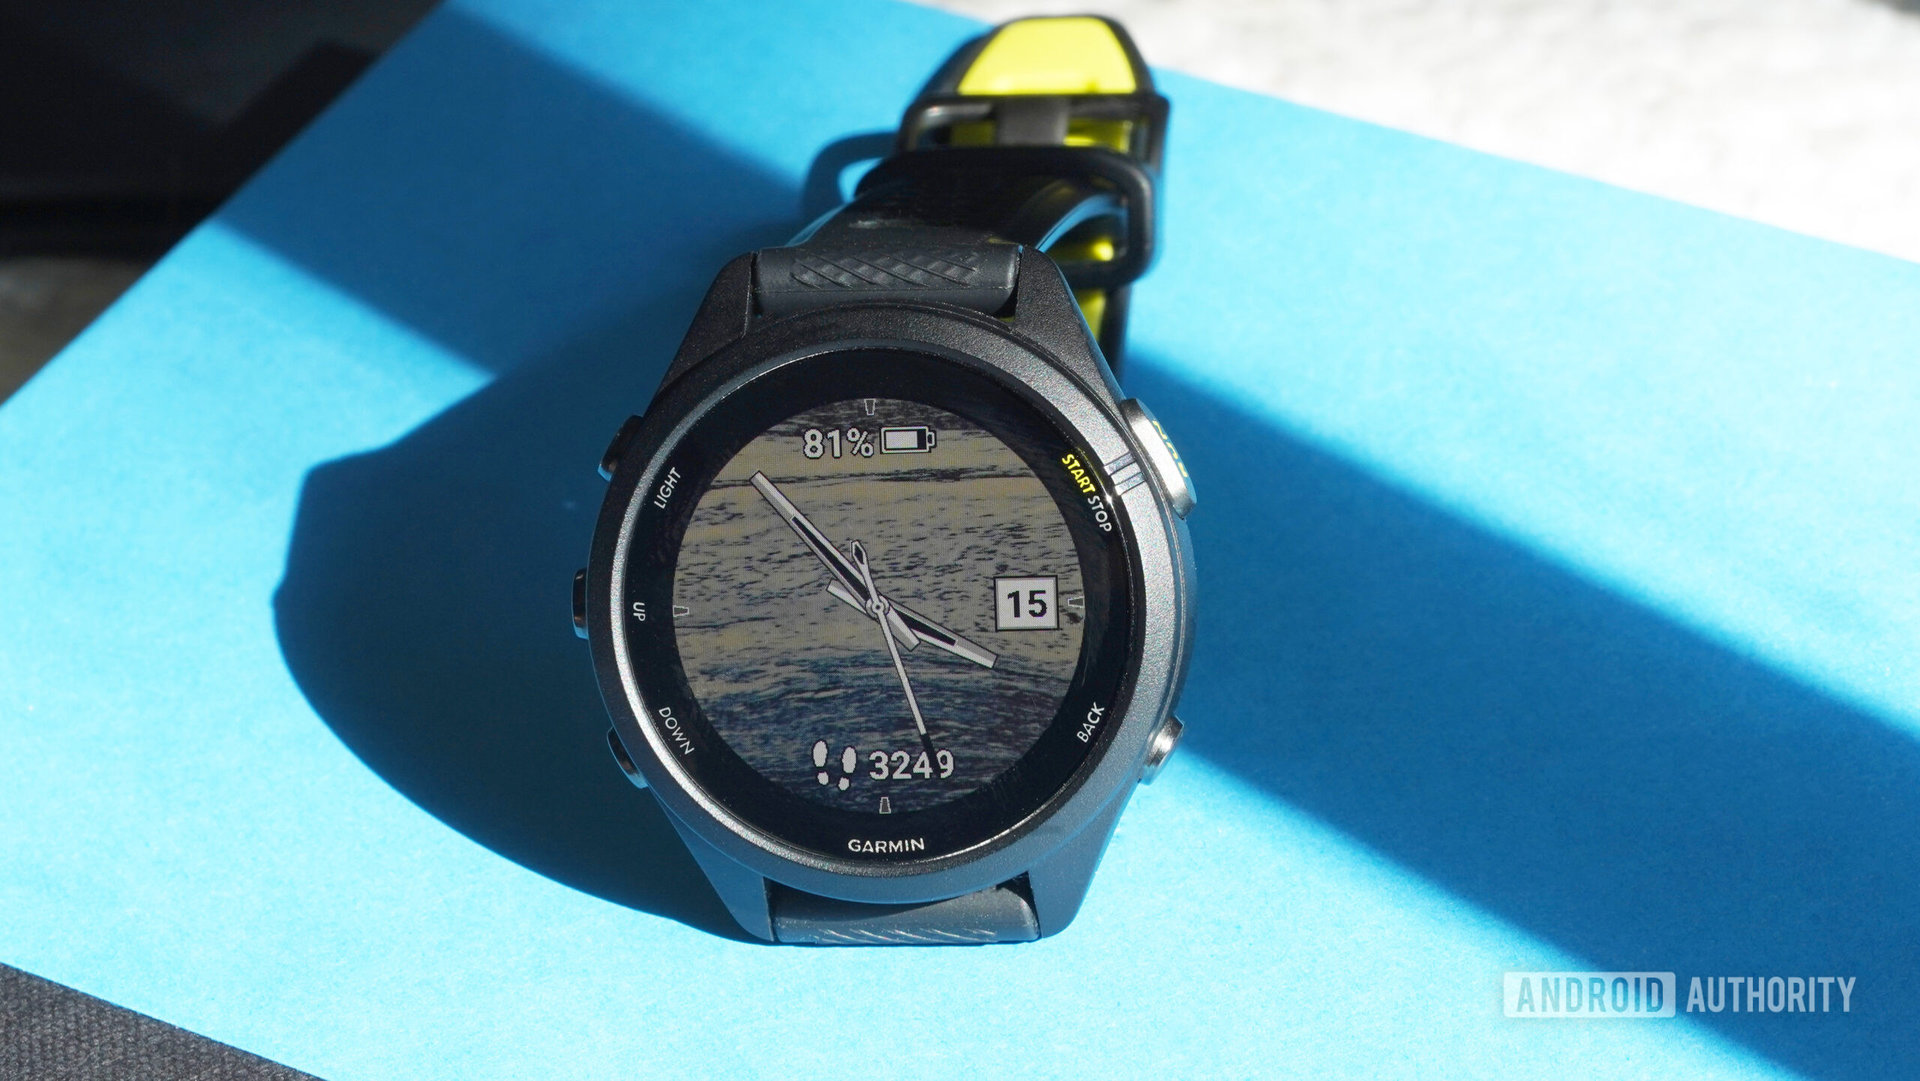 A Garmin Forerunner 265S perches on a blue book, displaying a users personal photo as a watch face.